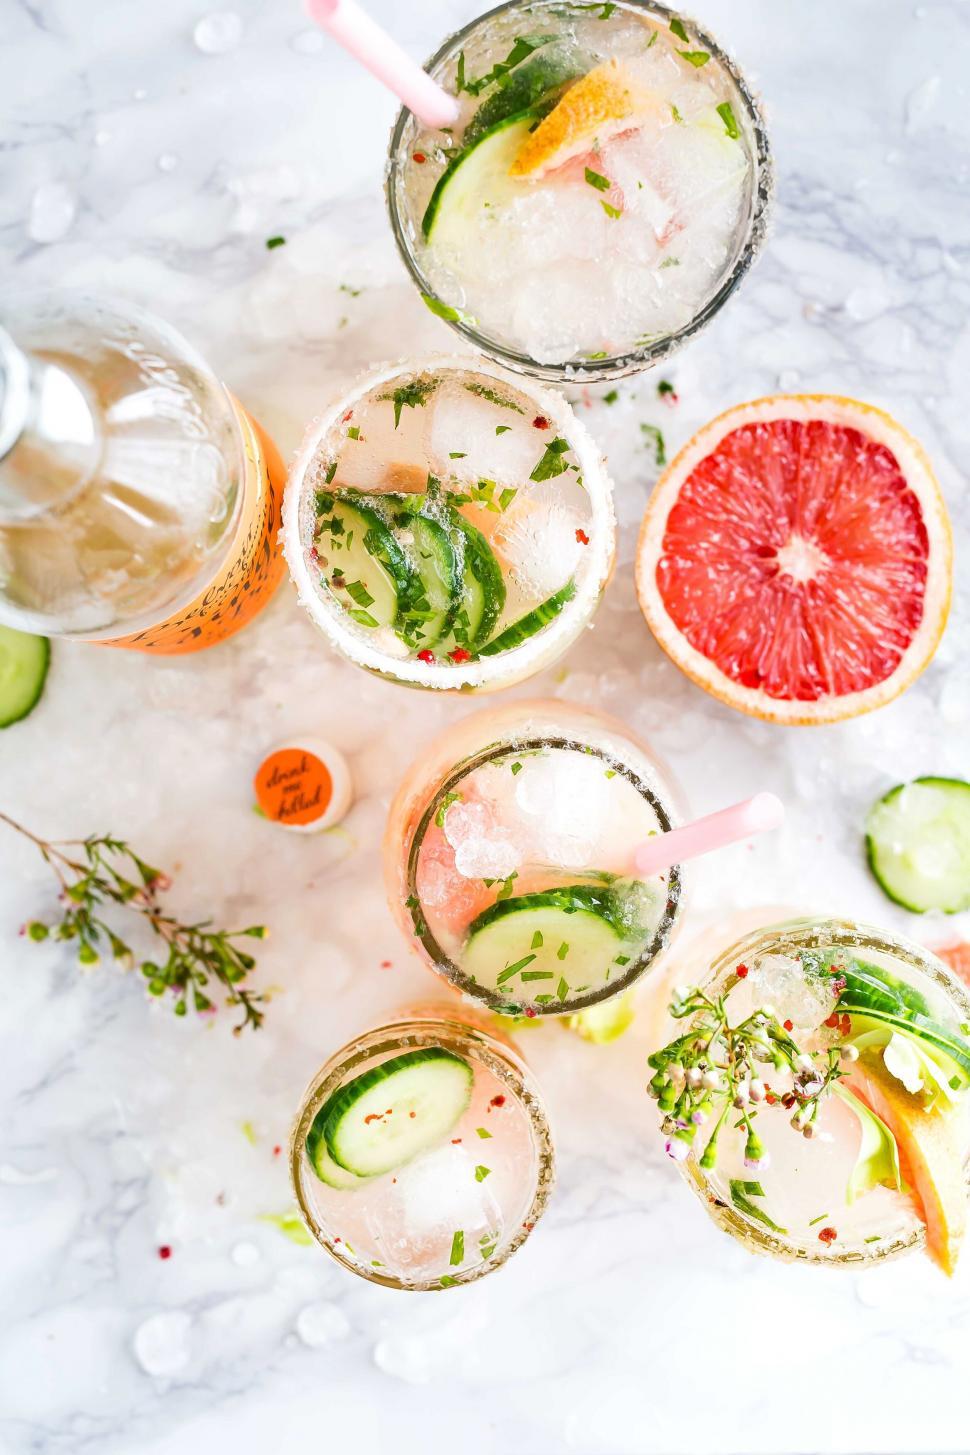 Free Image of Variety of refreshing drinks with fruit garnishes 